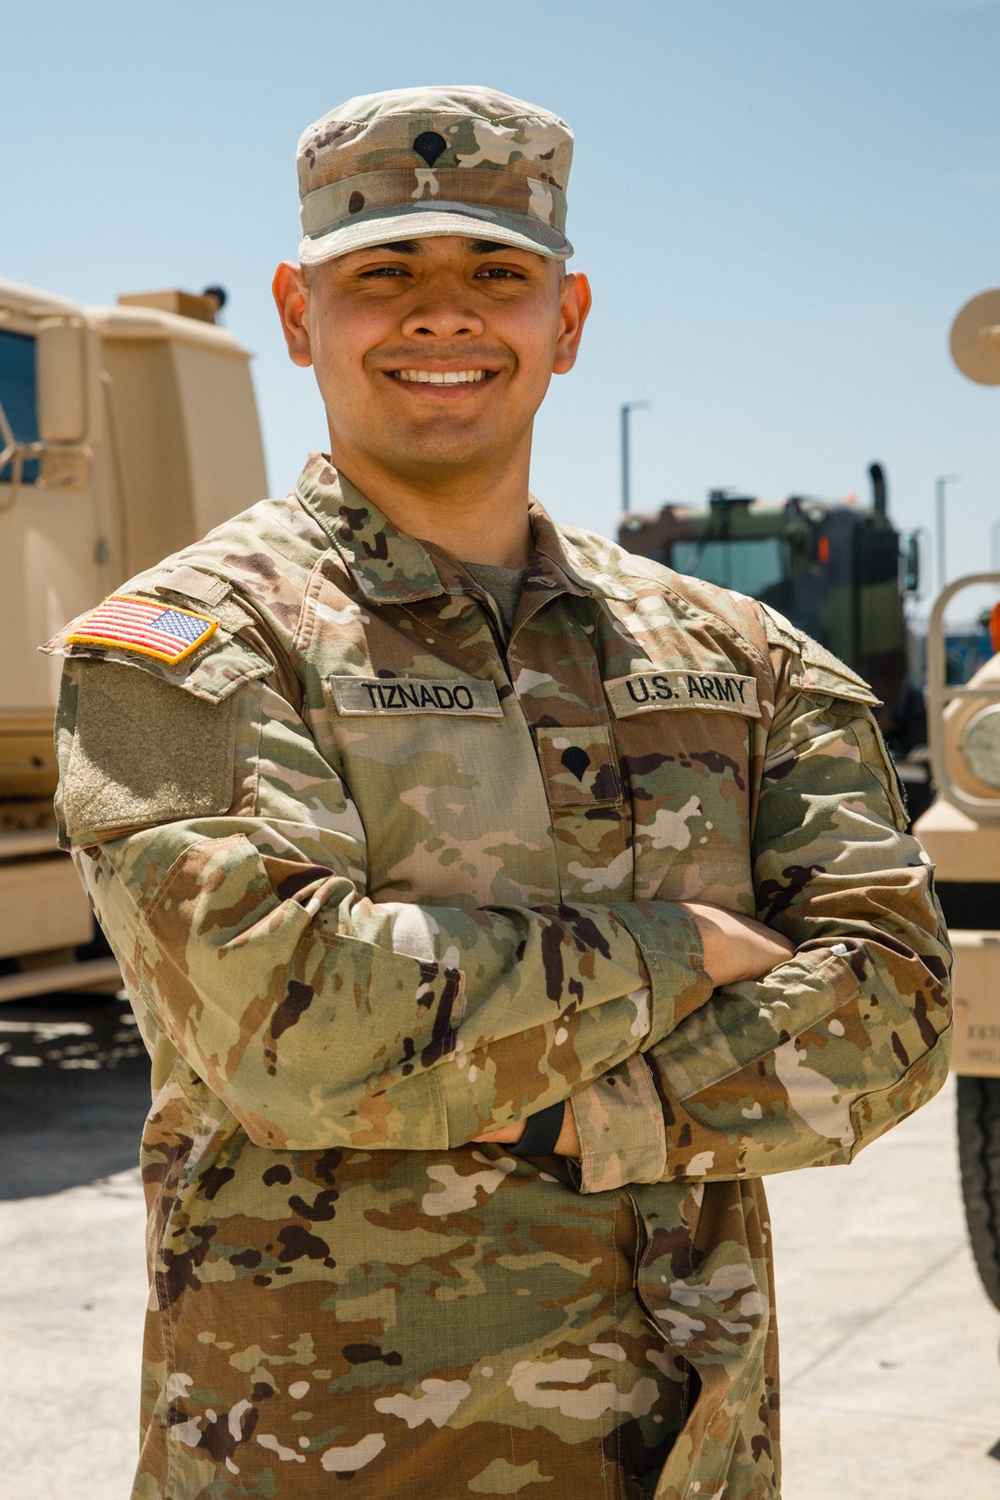 Nevada's Soldier of the Year ready for regional Best Warrior contest